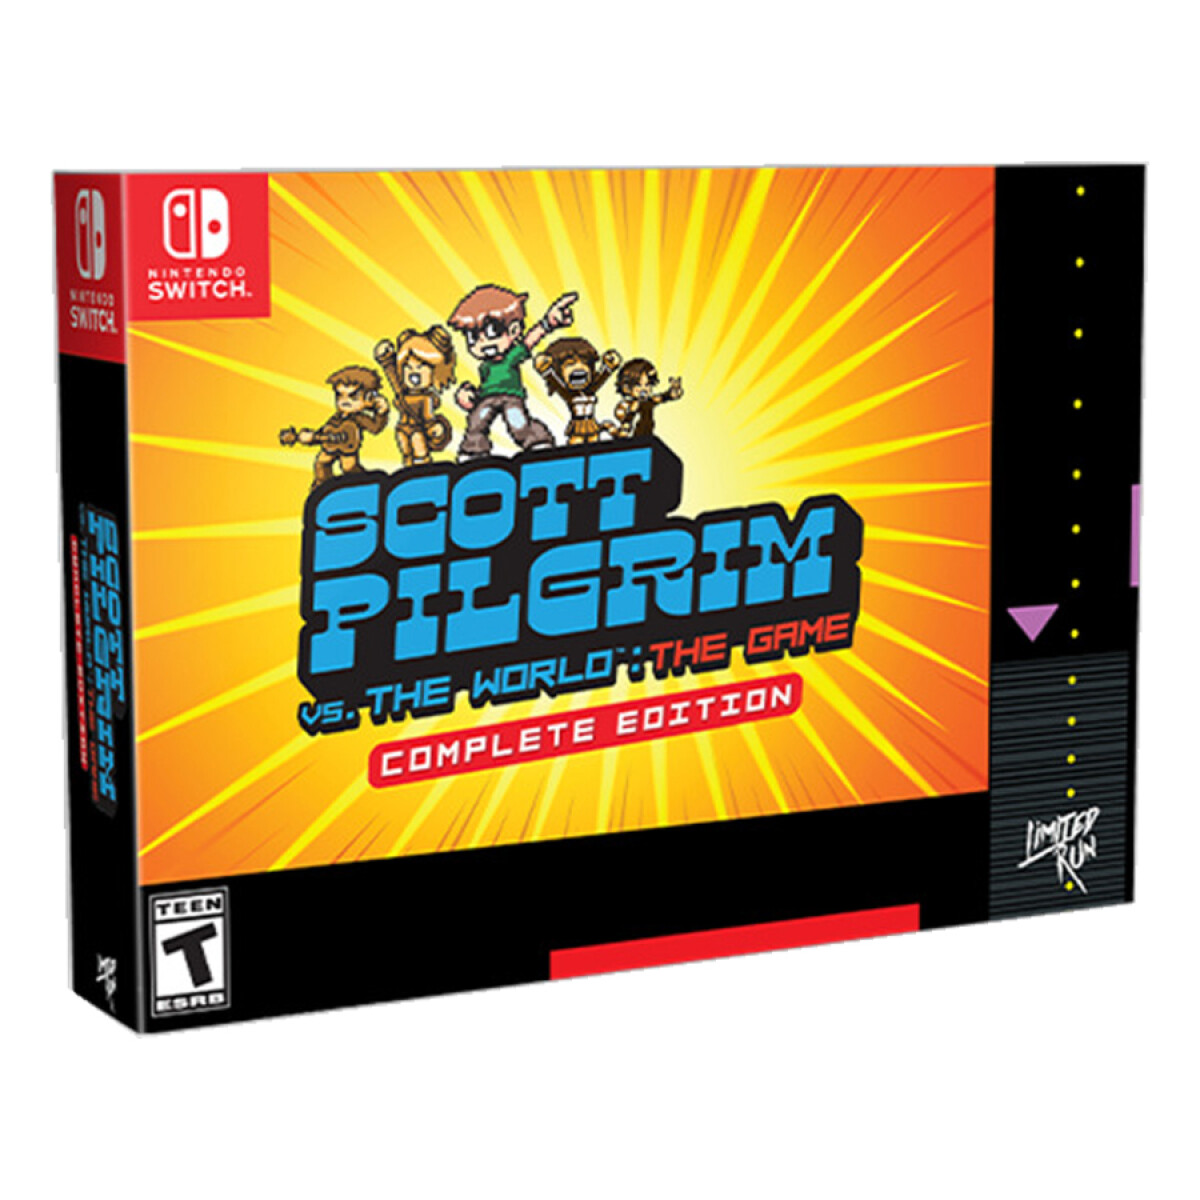 Scott Pilgrim vs. The World: The Game Complete Edition [Limited Run Games] 